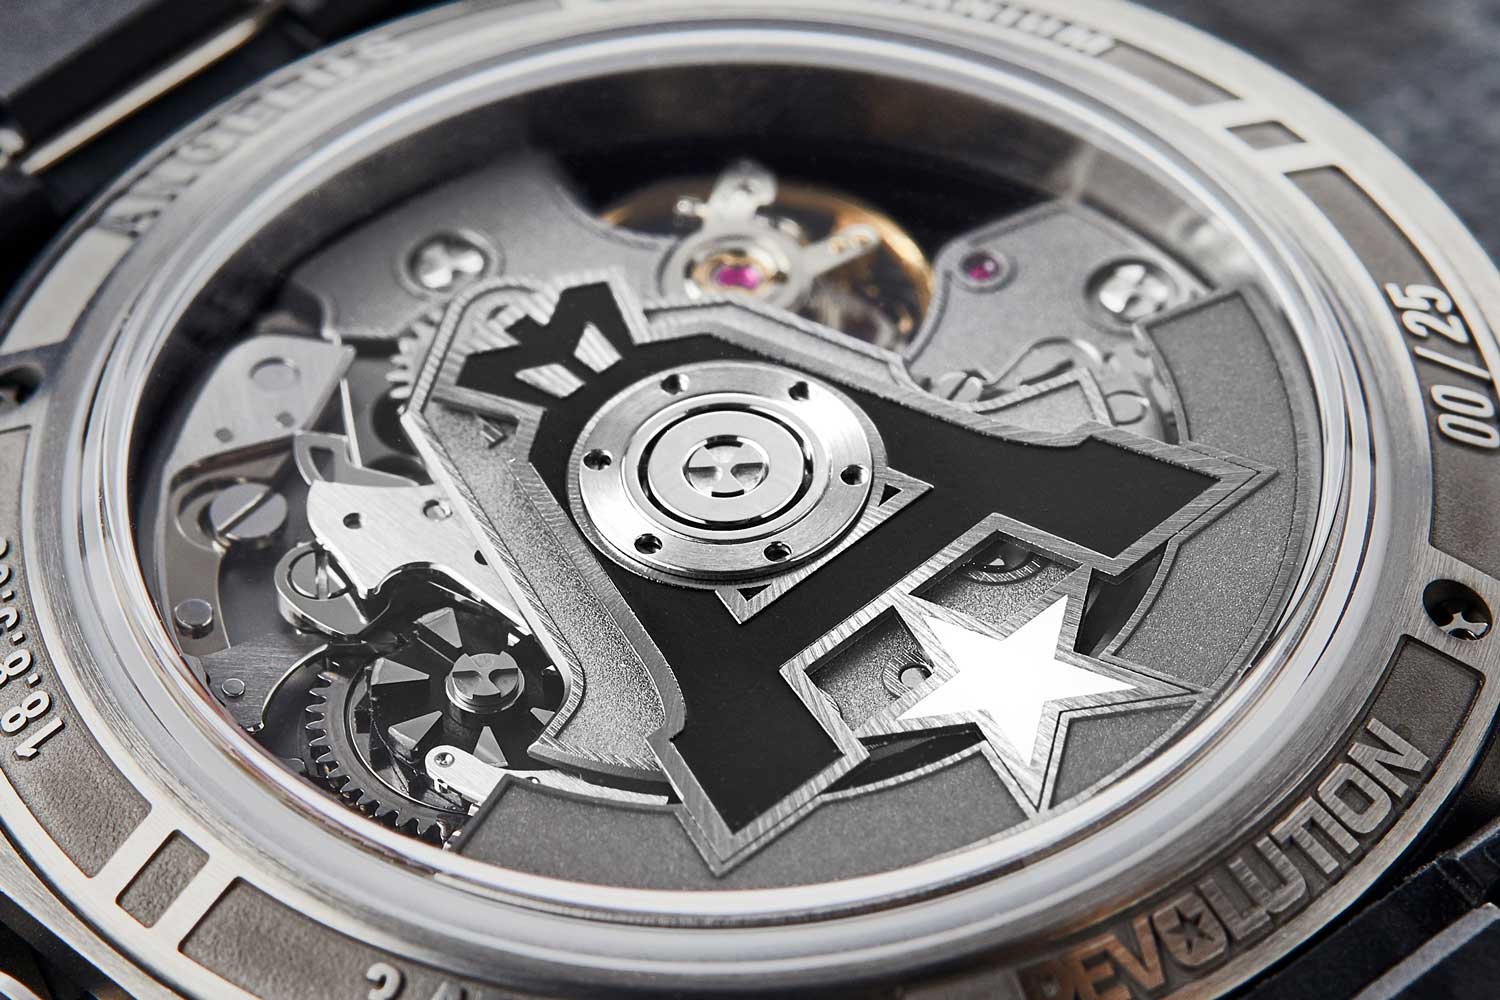 The Angelus Chronodate is powered by the caliber A-500 which features a column wheel, sandblasted NAC-treated bridges and a proprietary rotor design (Image: Revolution©)